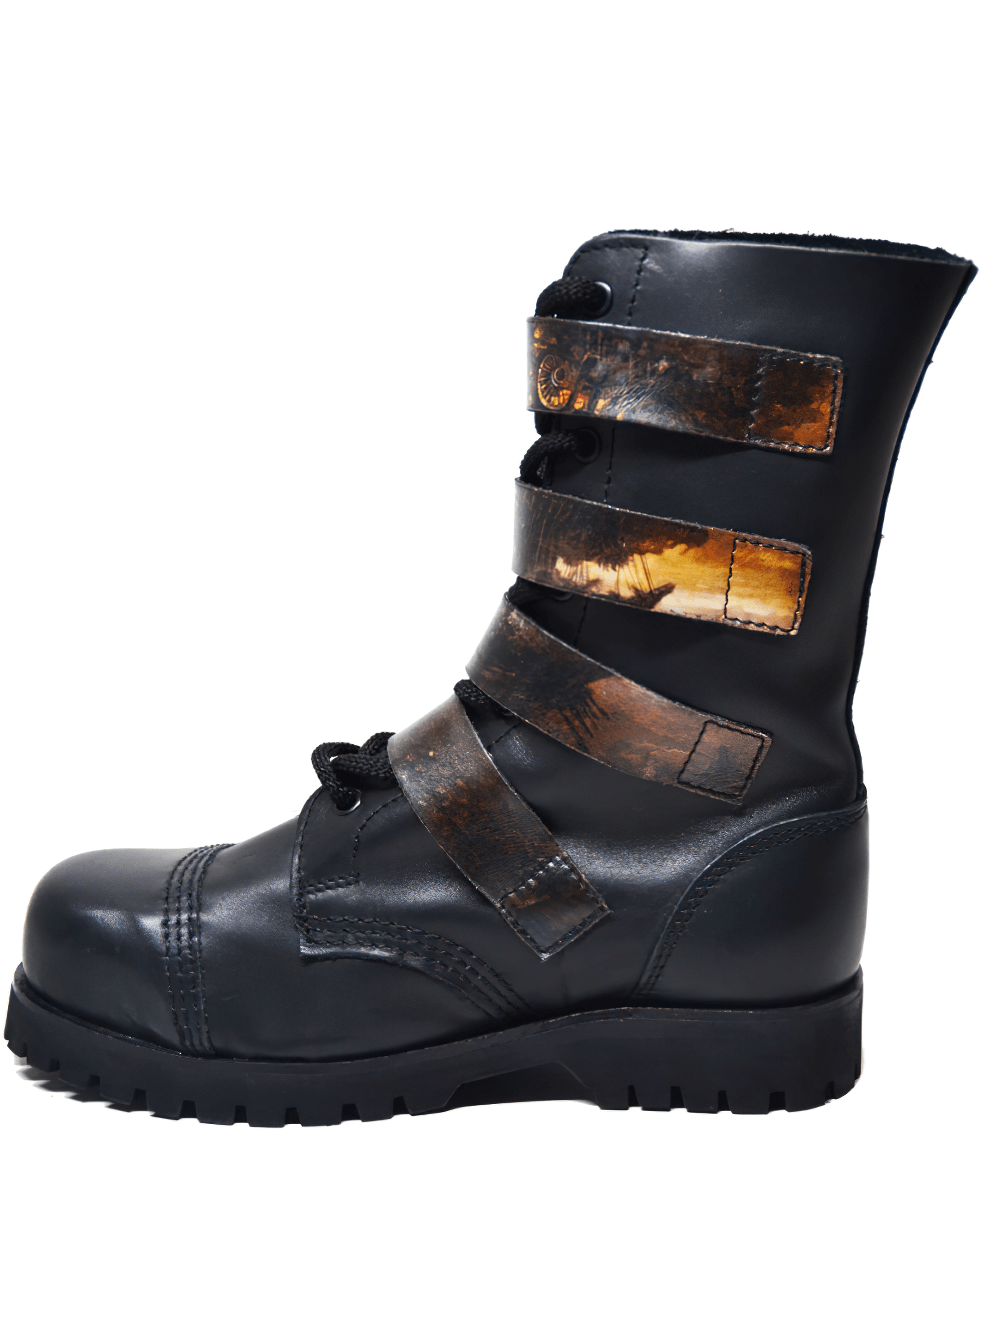 Stylish Black Grained Leather Boots with Buckles